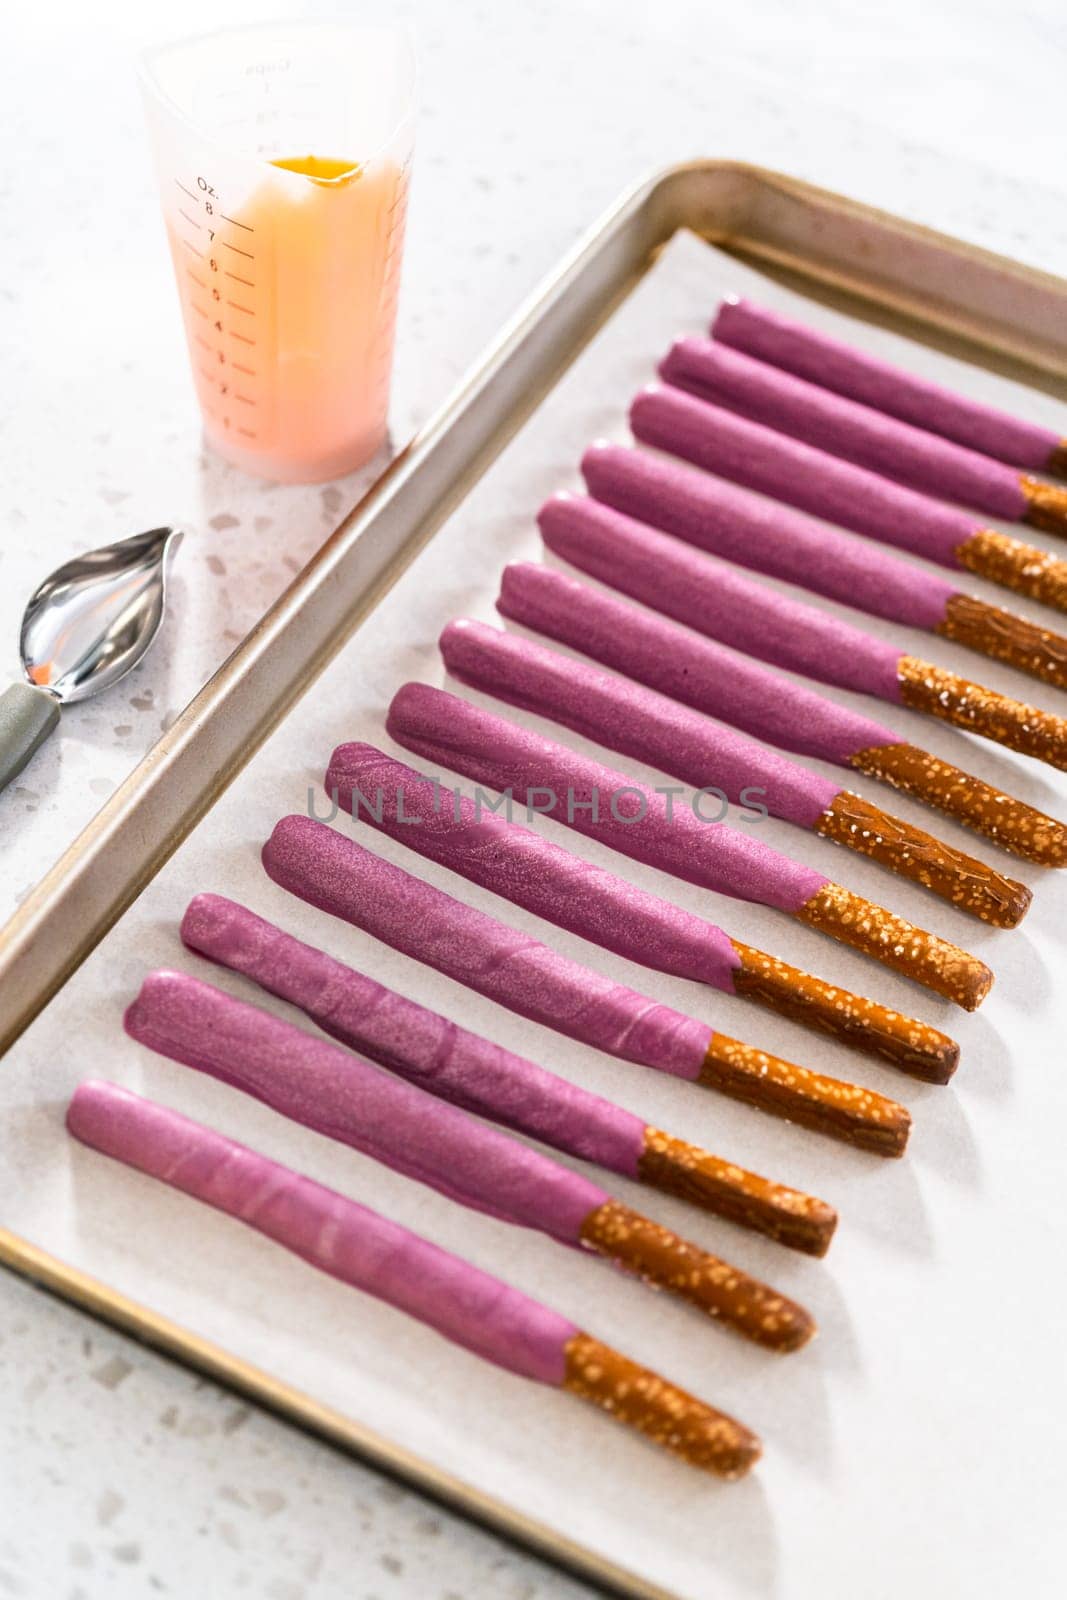 Dipping pretzel rods into melted chocolate to make Halloween chocolate-covered pretzel rods.